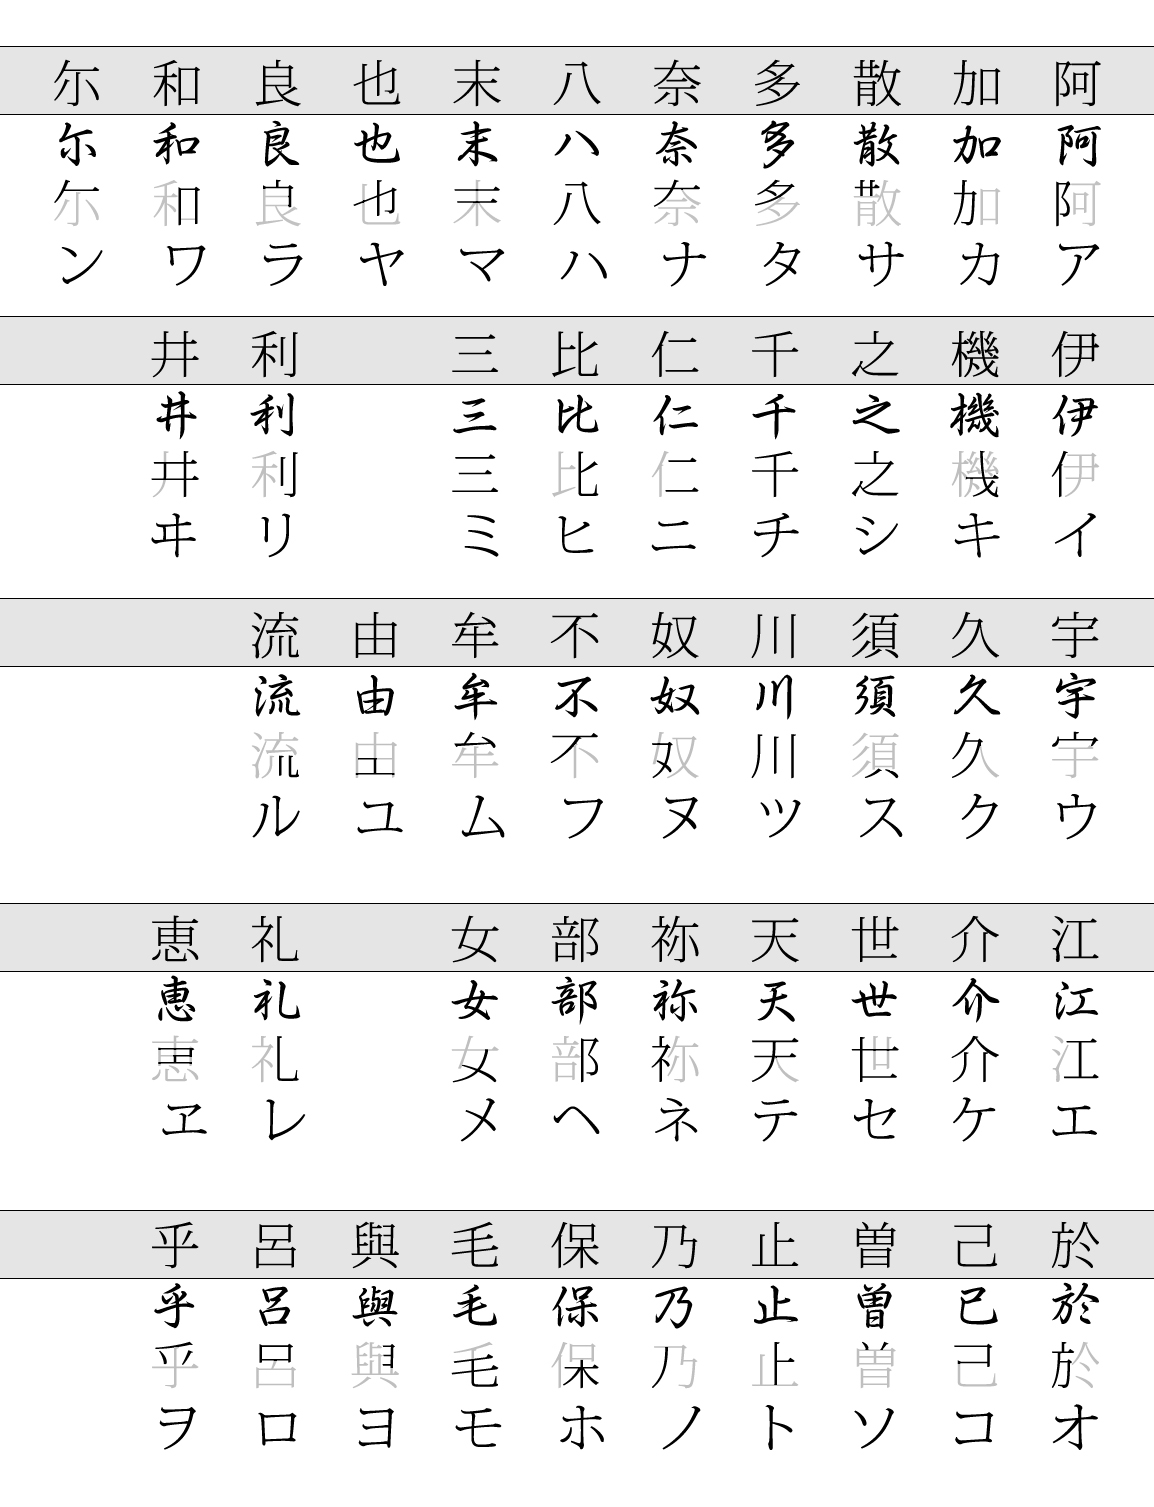 grammar - why the translation does not have to decide on ? what does にする  actually mean? - Japanese Language Stack Exchange